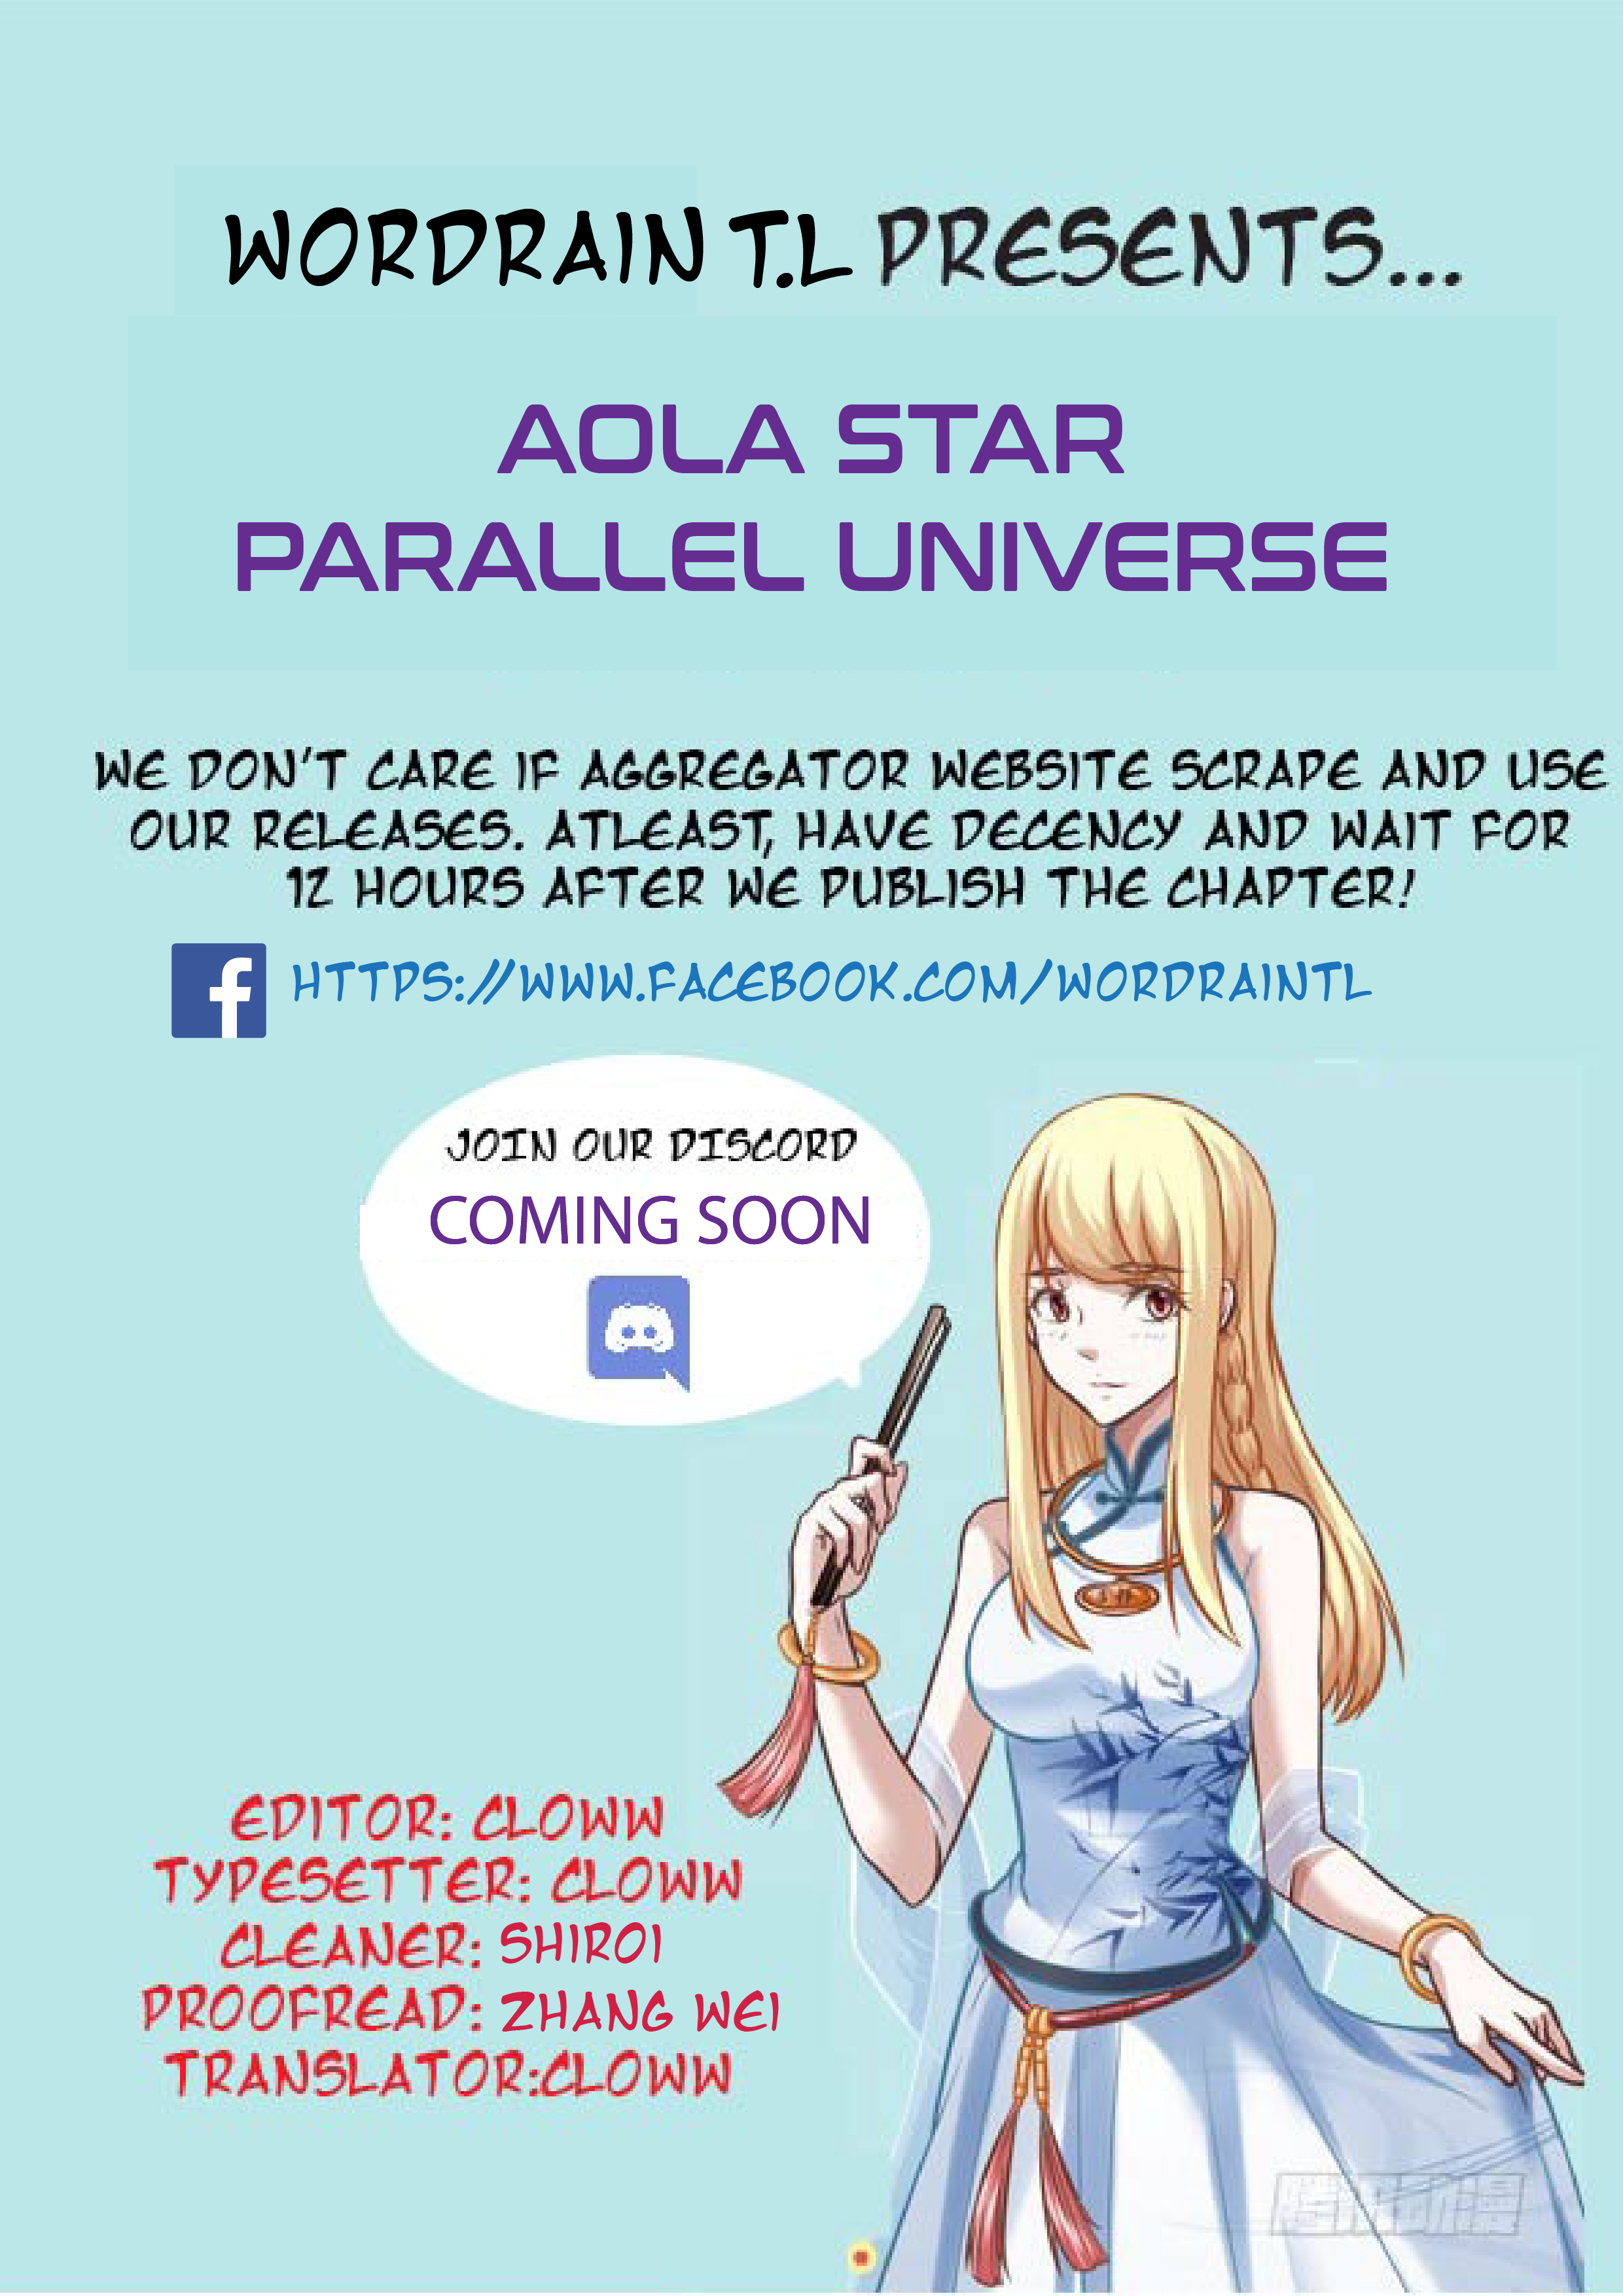 Aola Star - Parallel Universe - Page 1